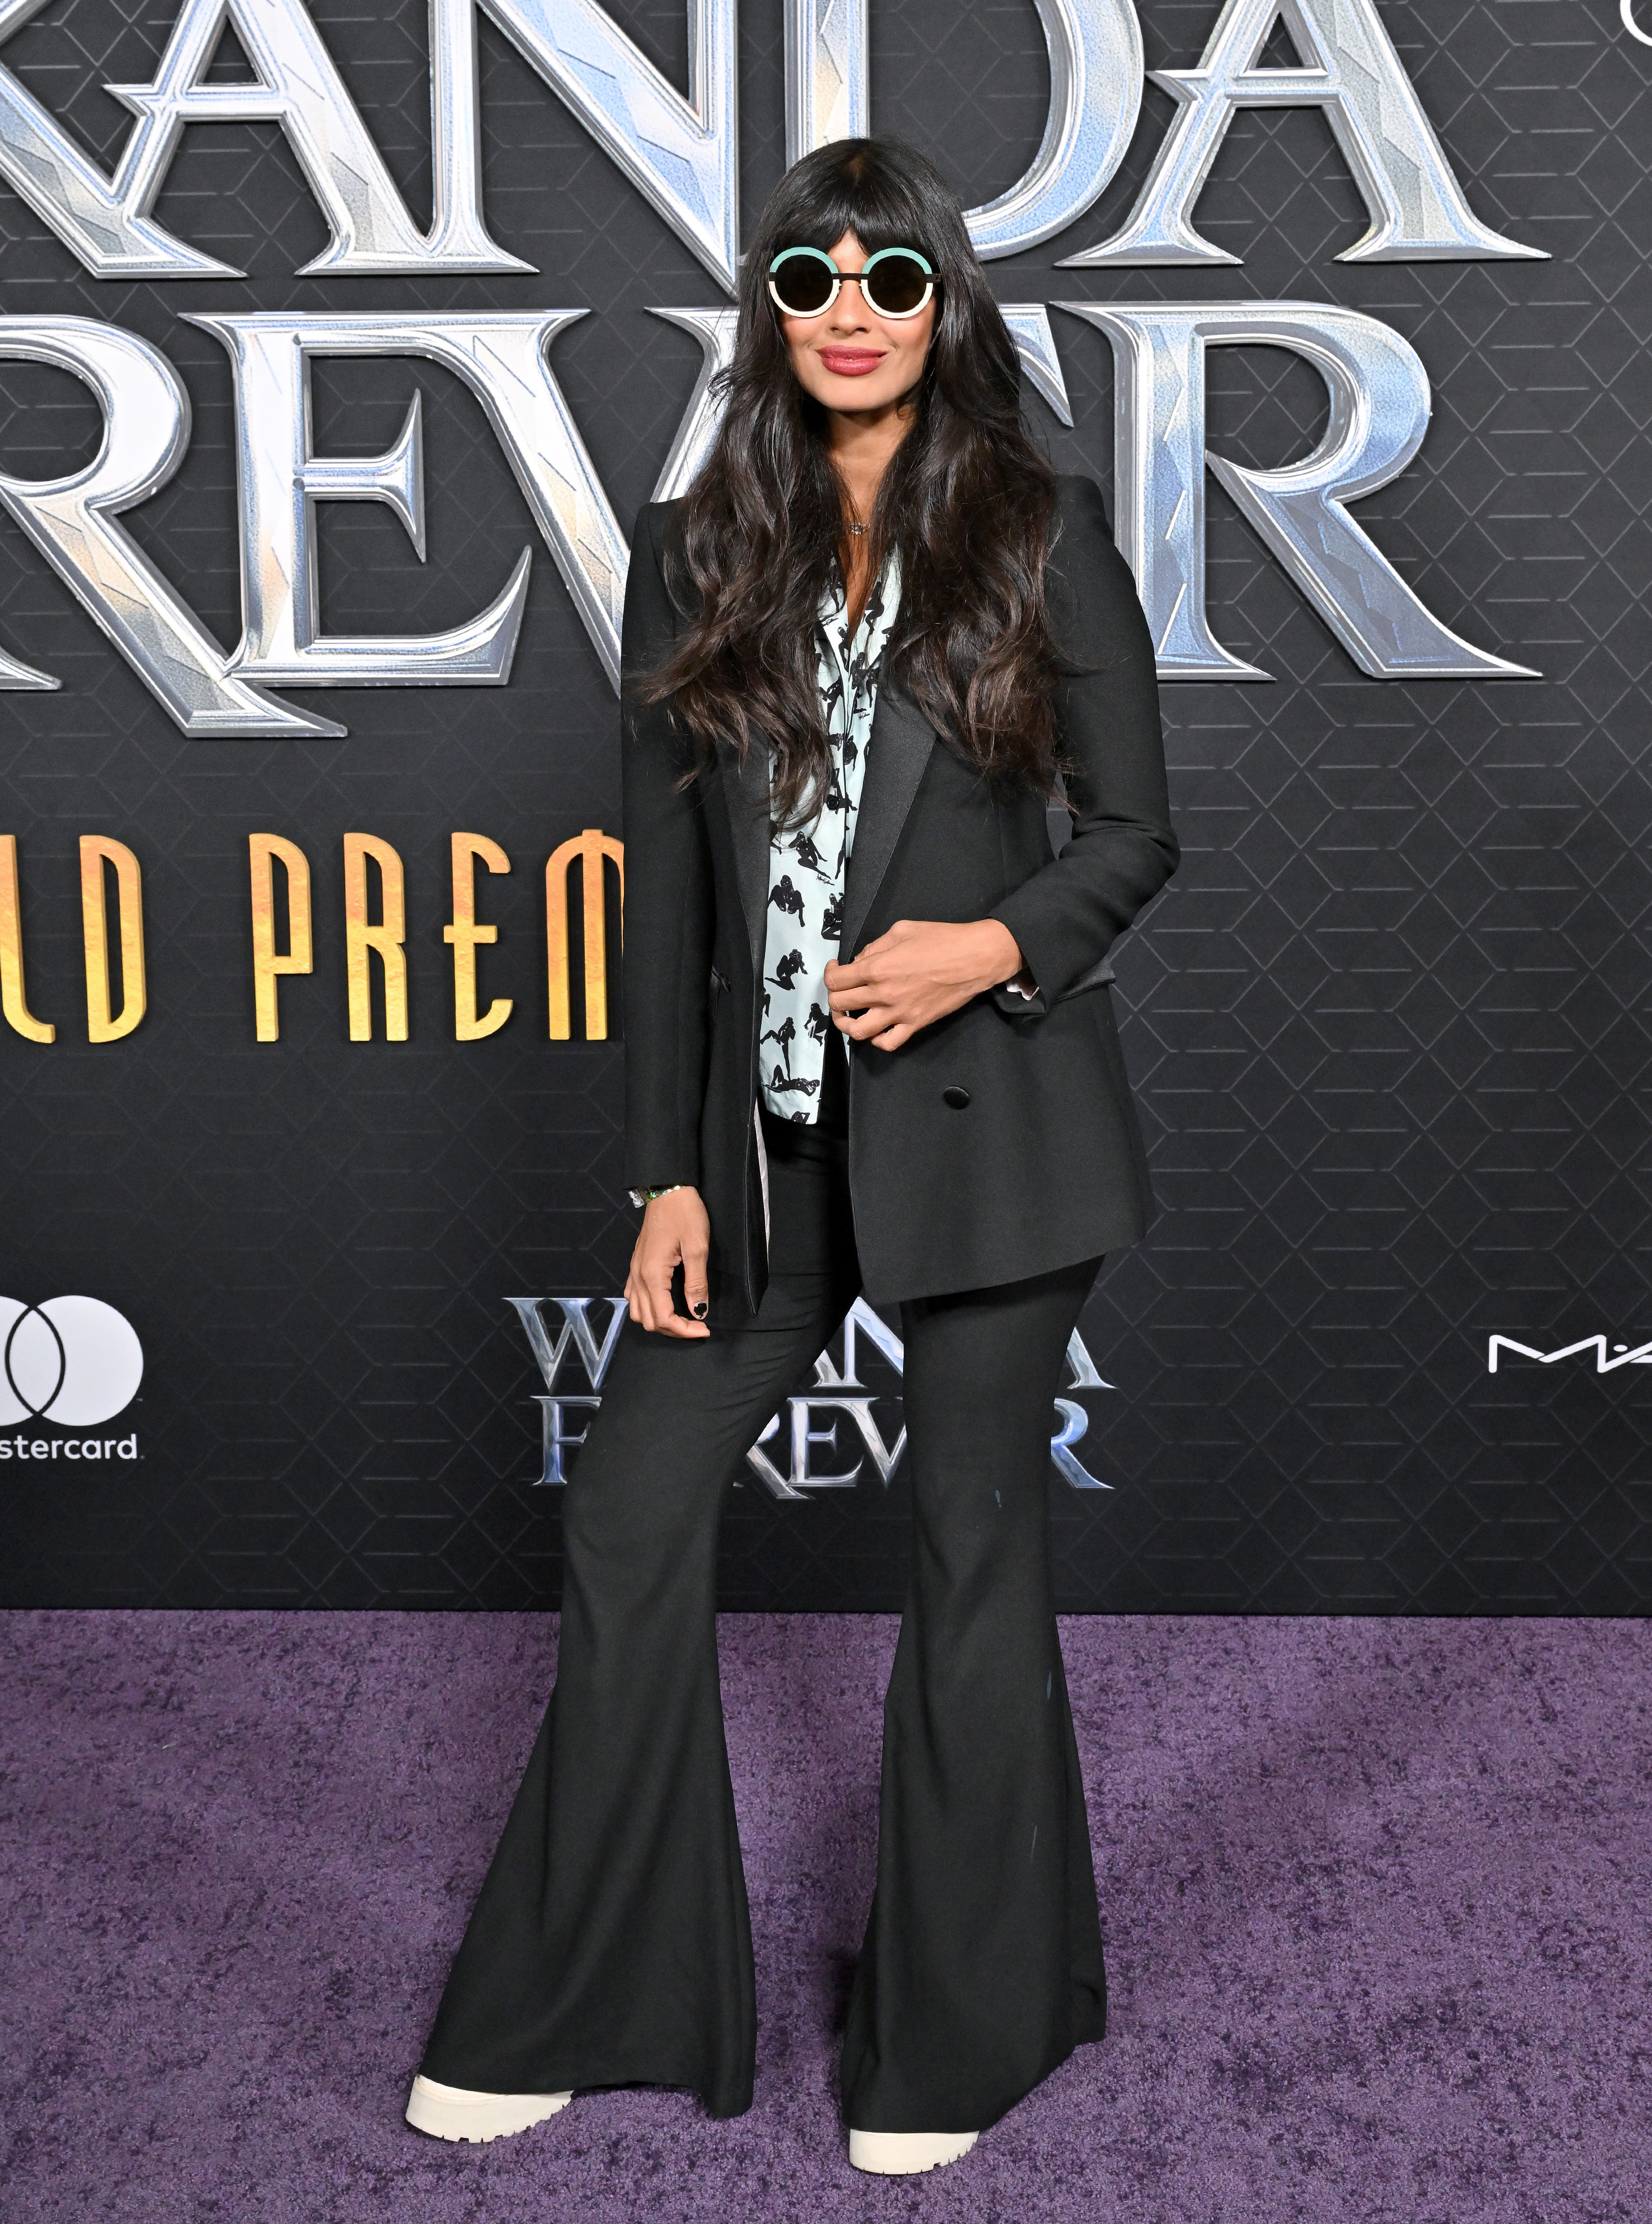 Jameela wore a pantsuit with flared pants